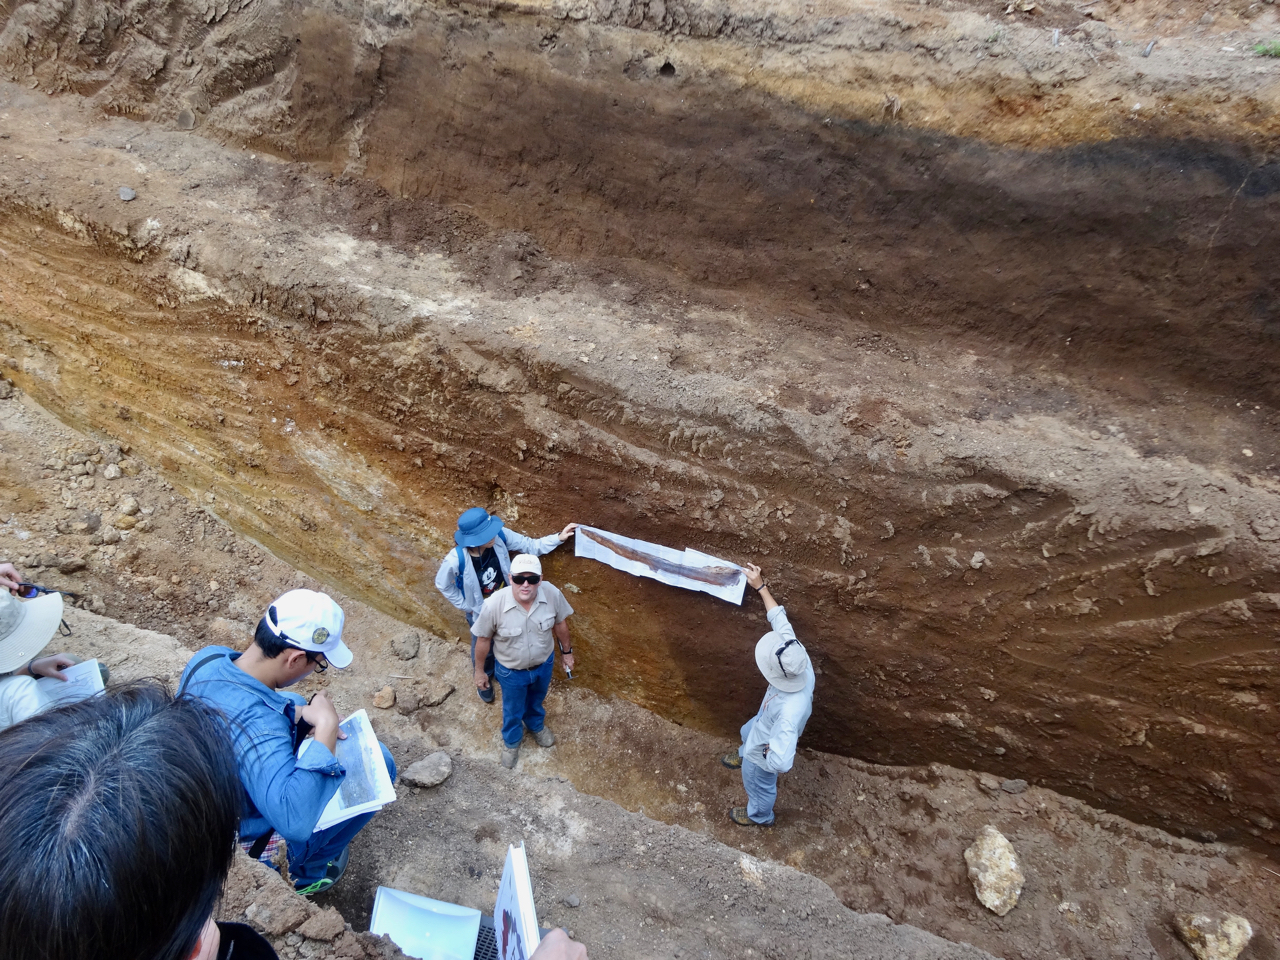 Professor Ray Weldon delivers his class lecture while standing in the Mae Chan fault (Source: Tim Dawson)